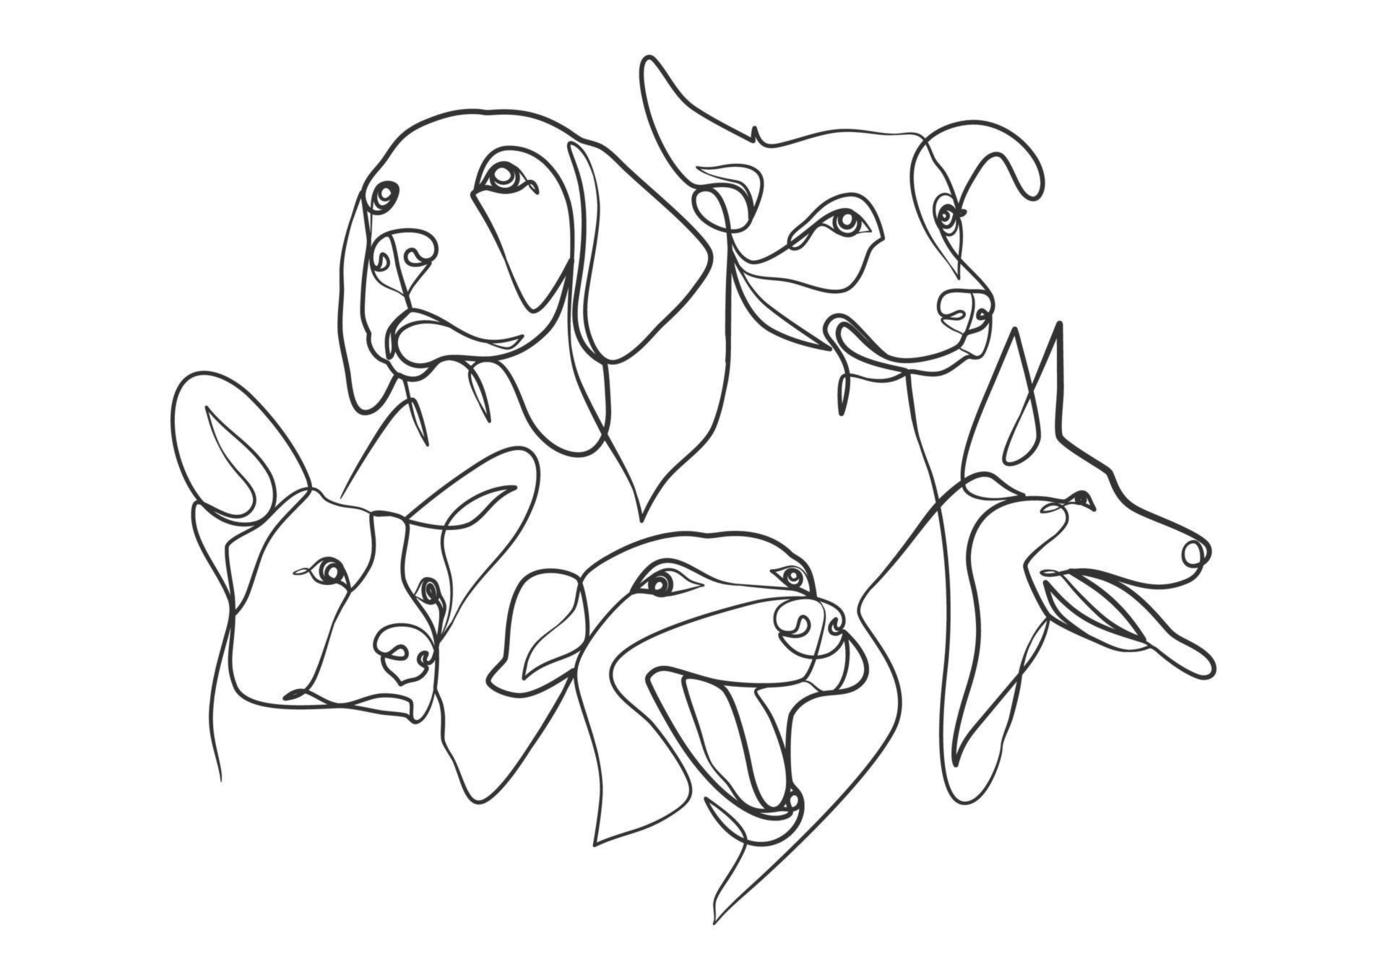 Continuous line drawing style of dog head vector